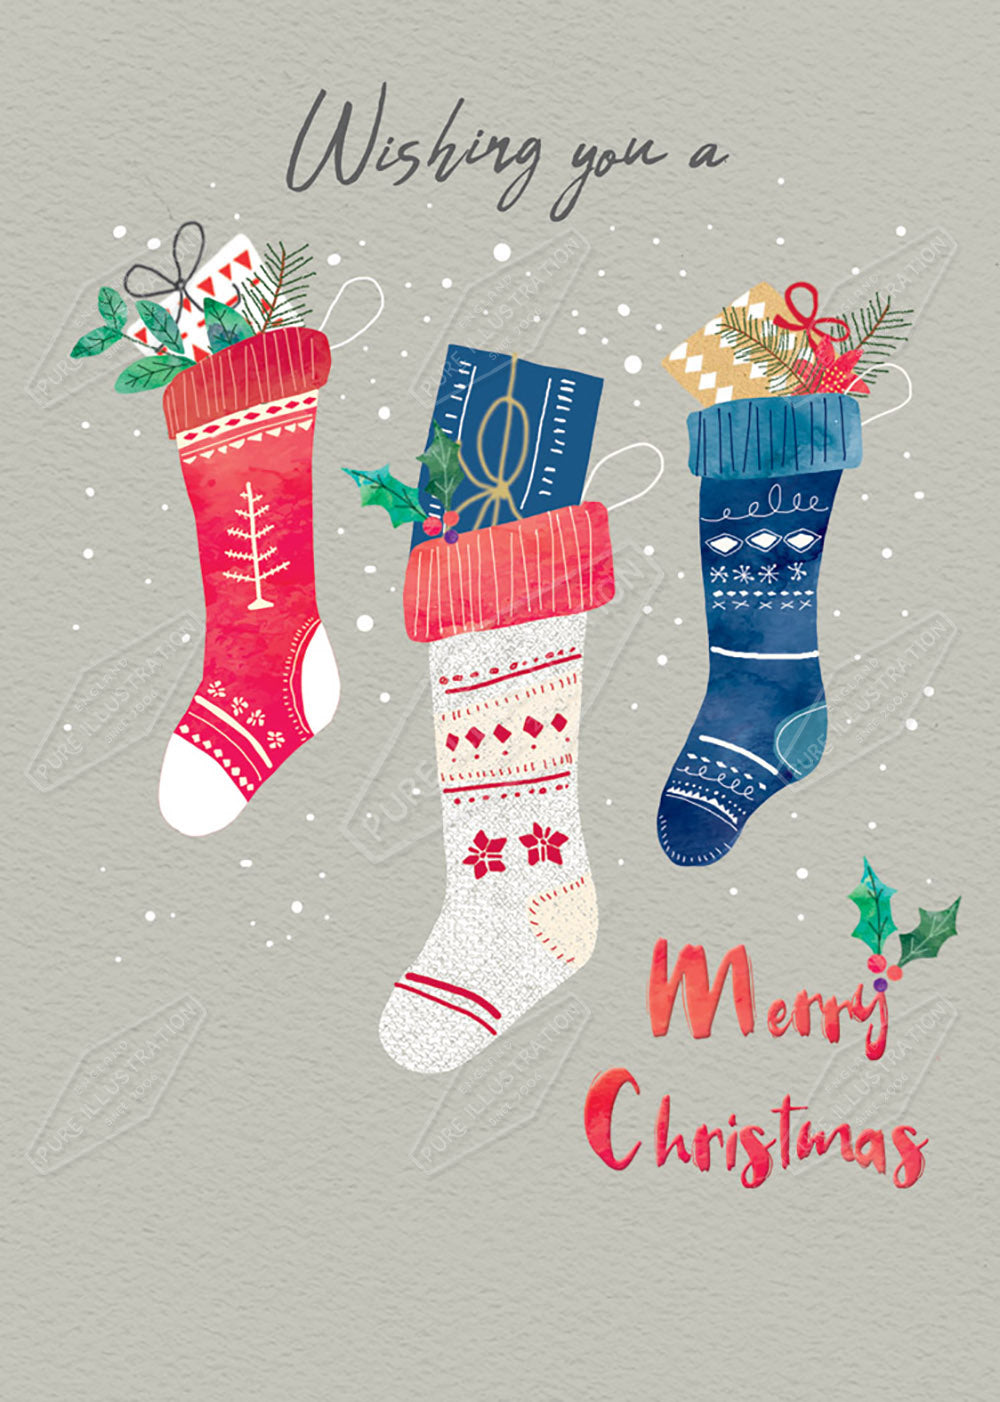 Christmas Stockings Illustration by Cory Reid for Pure Art Licensing Agency & Surface Design Studio